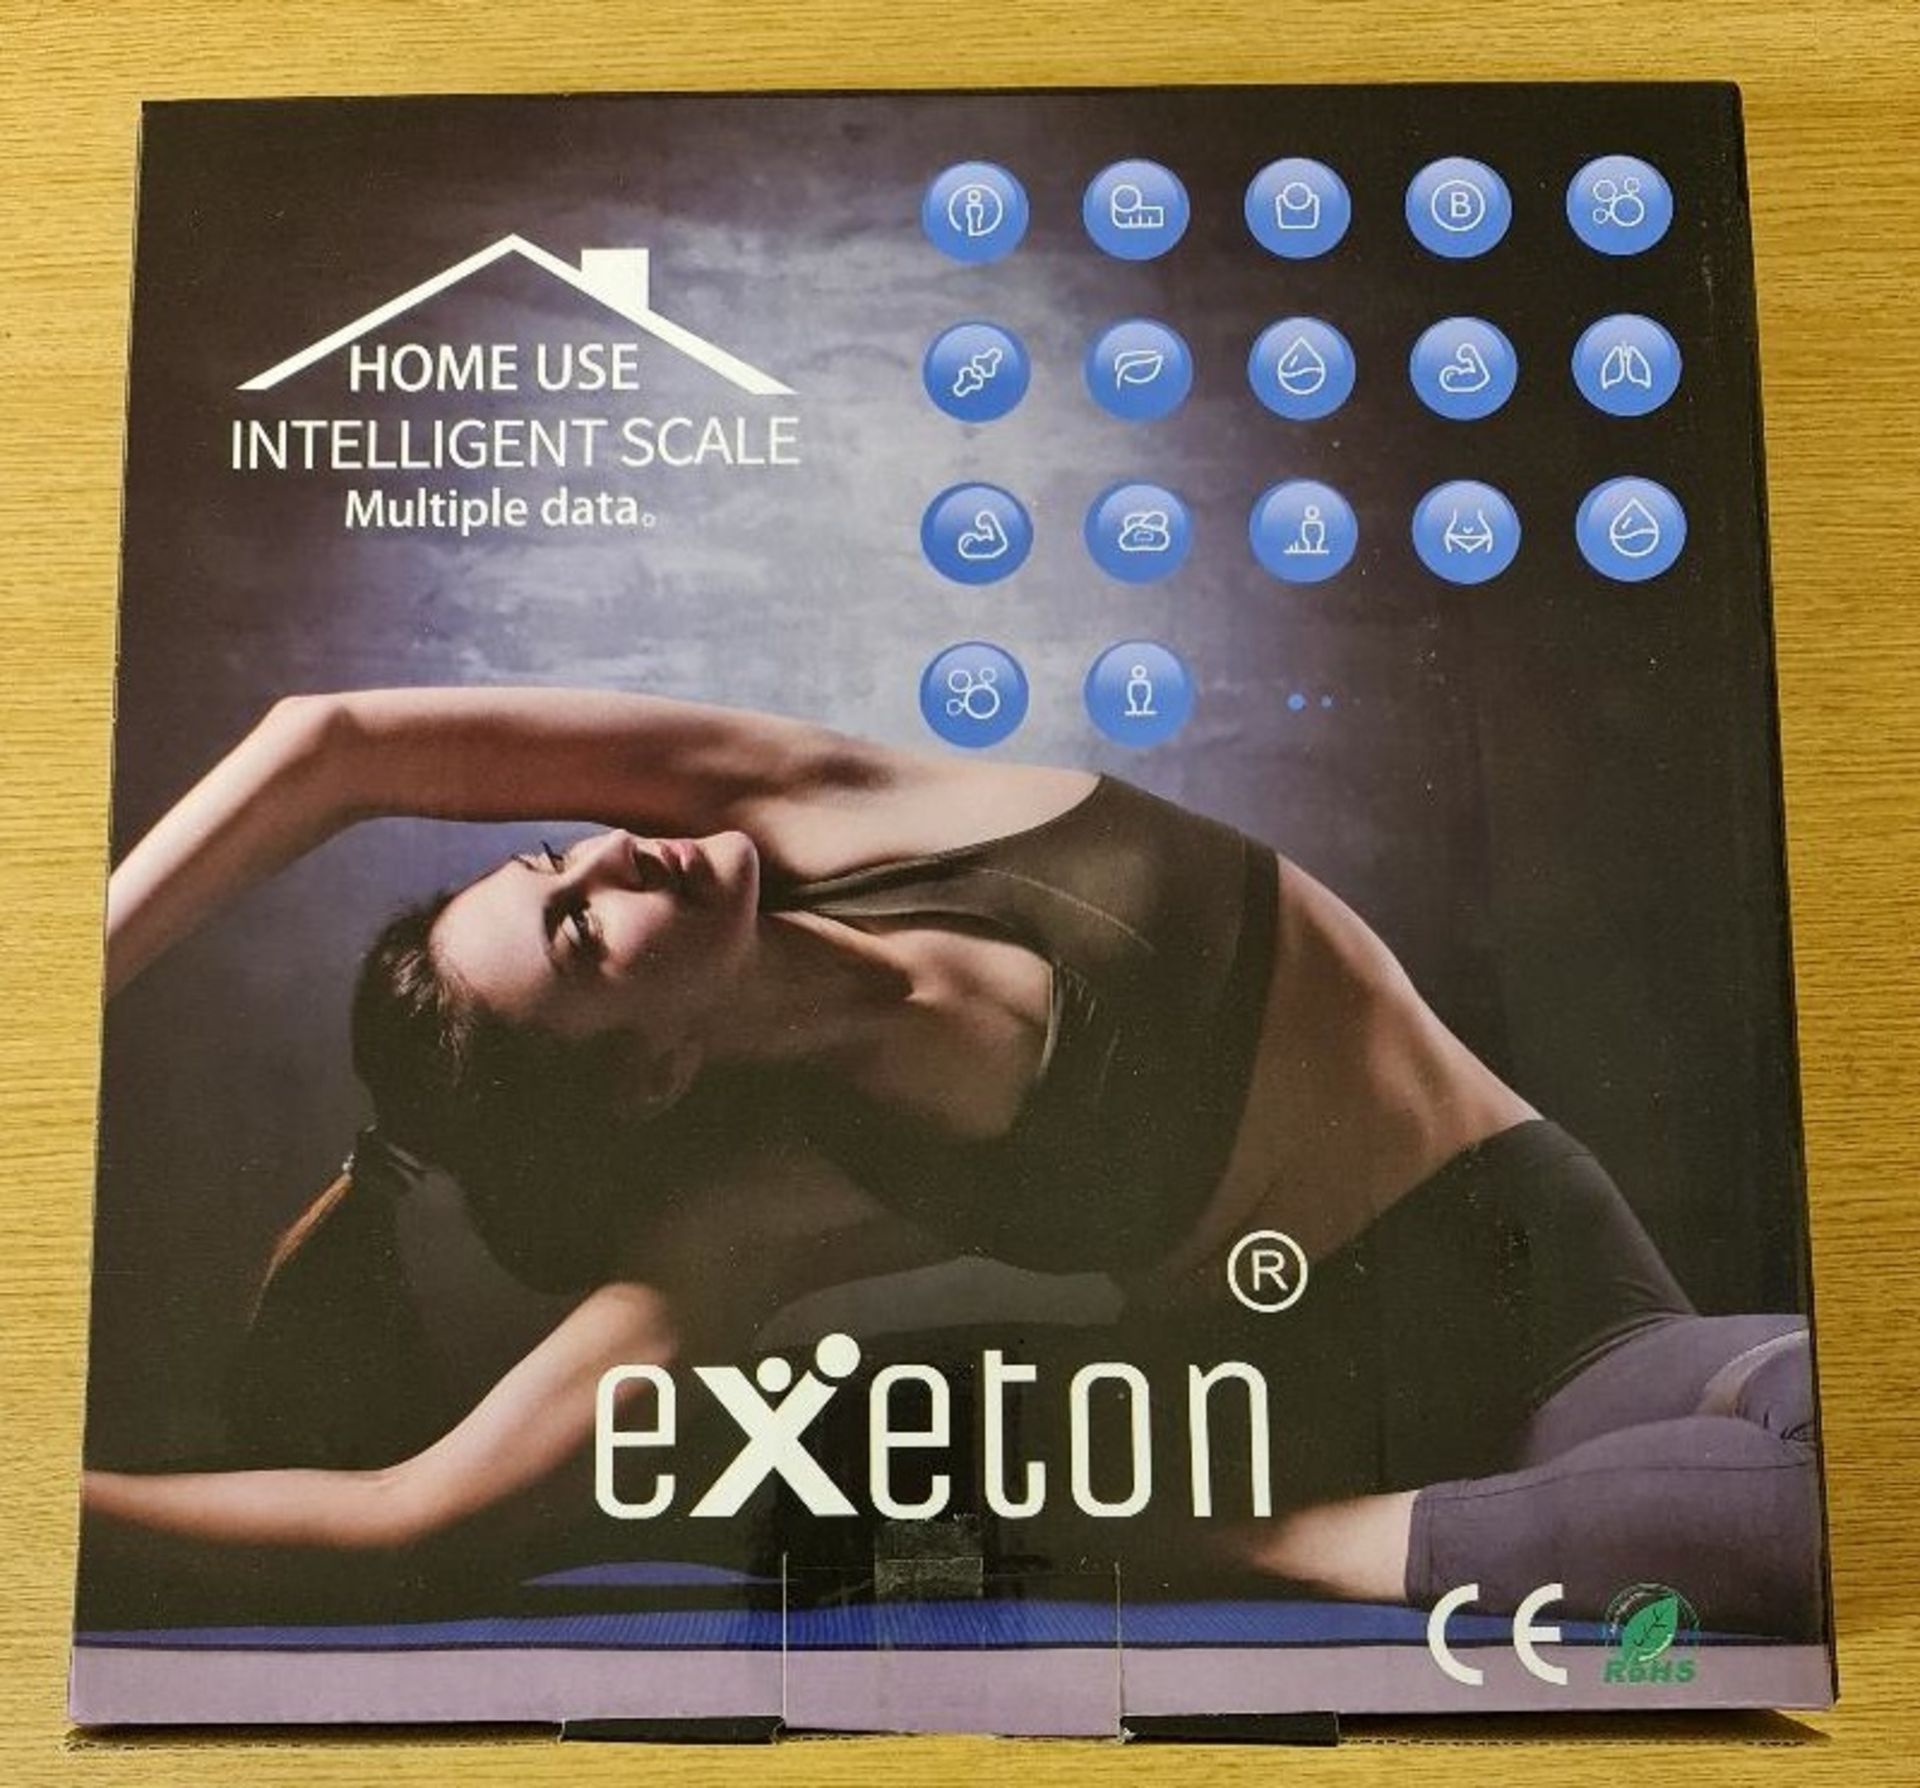 1 x Exeton, Body Weighing Scale, Bluetooth Smart, Body Fat, BMI, Rechargeable 180Kg (396 Lbs) - Image 7 of 7